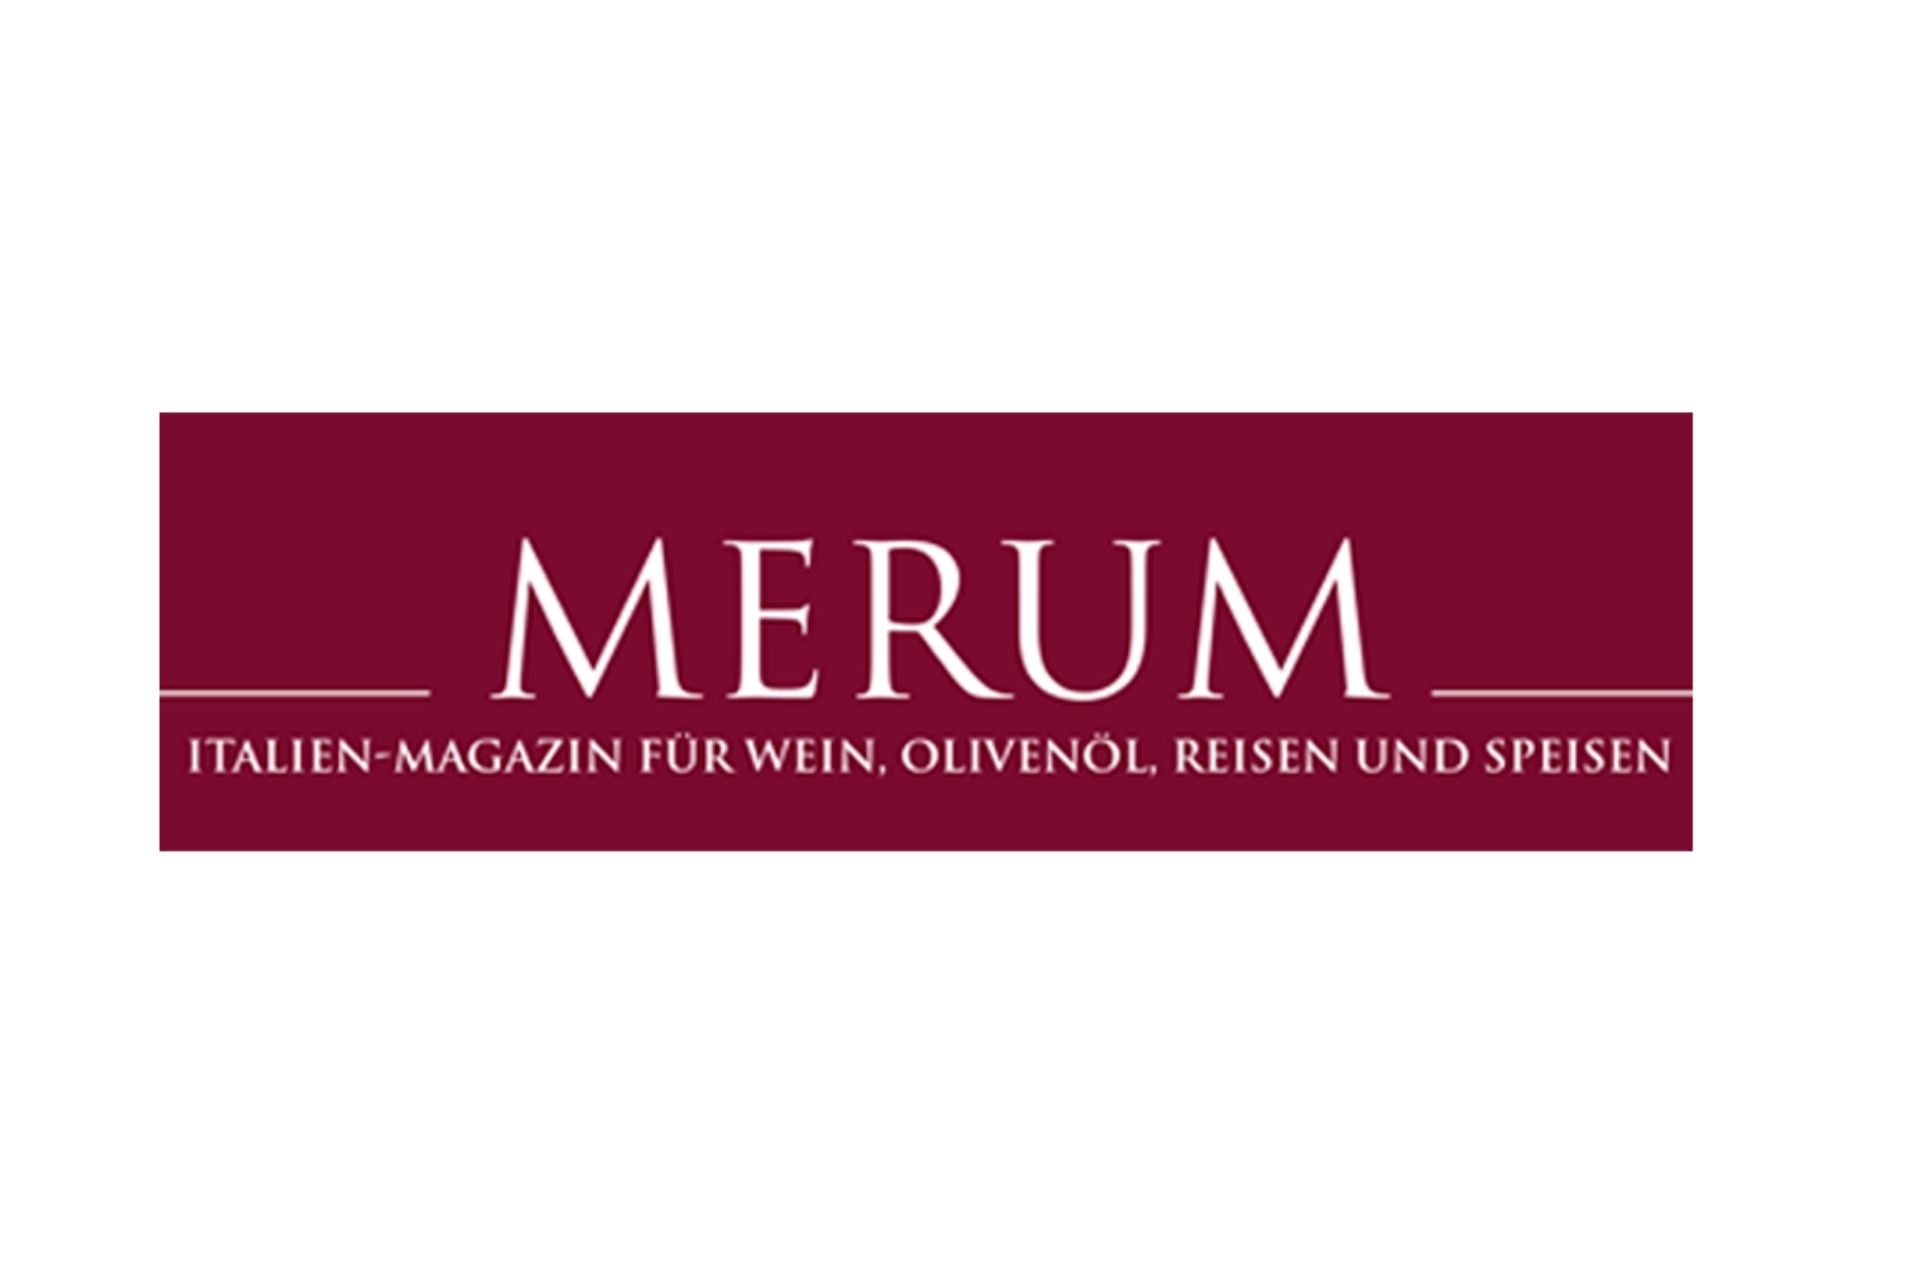 The results of the last tasting carried out by the Merum.